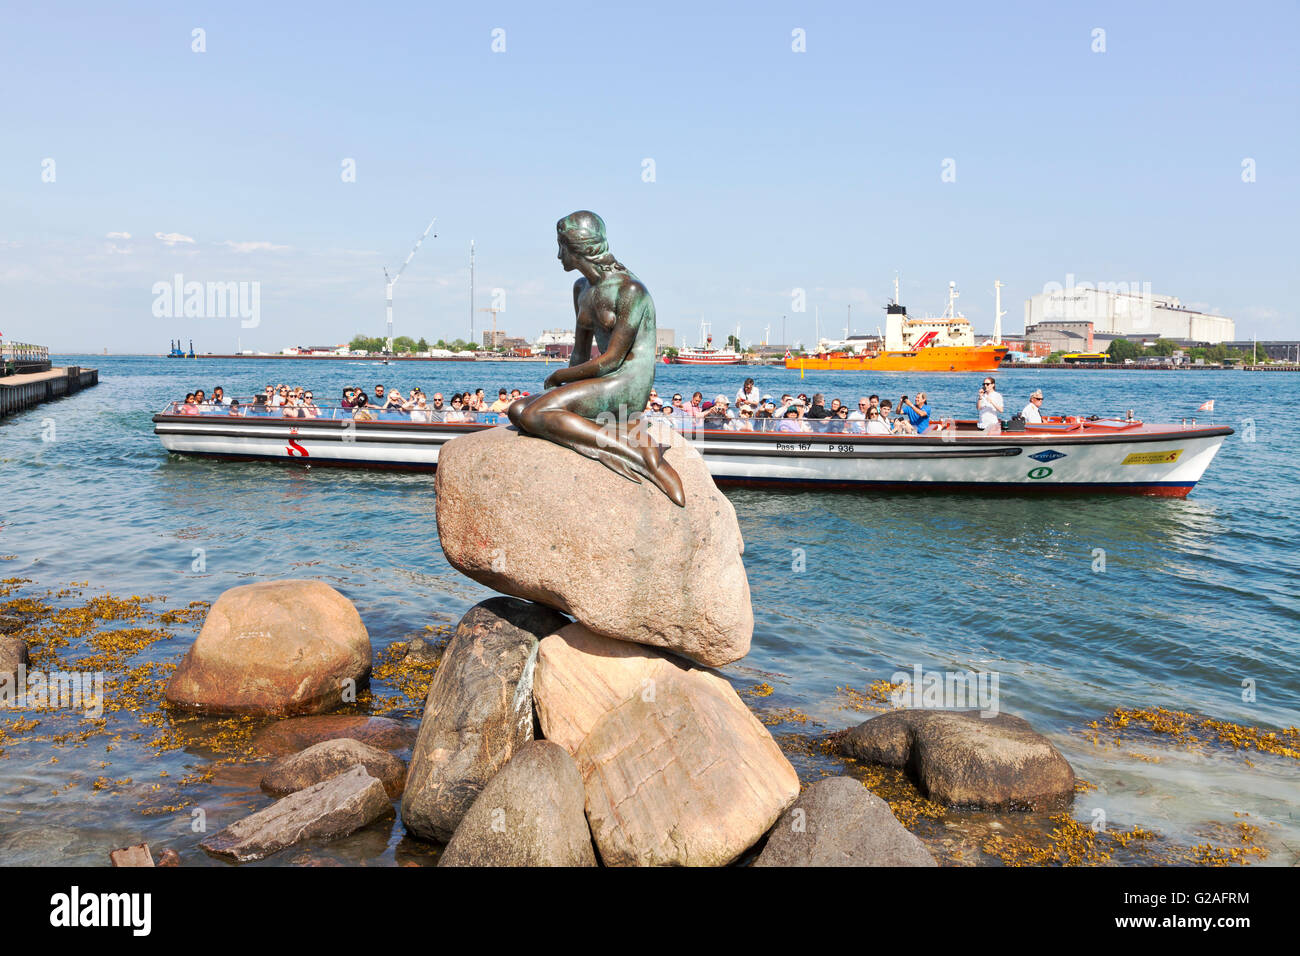 A canal tour cruise boat on a sightseeing tour at the Little Mermaid in ...